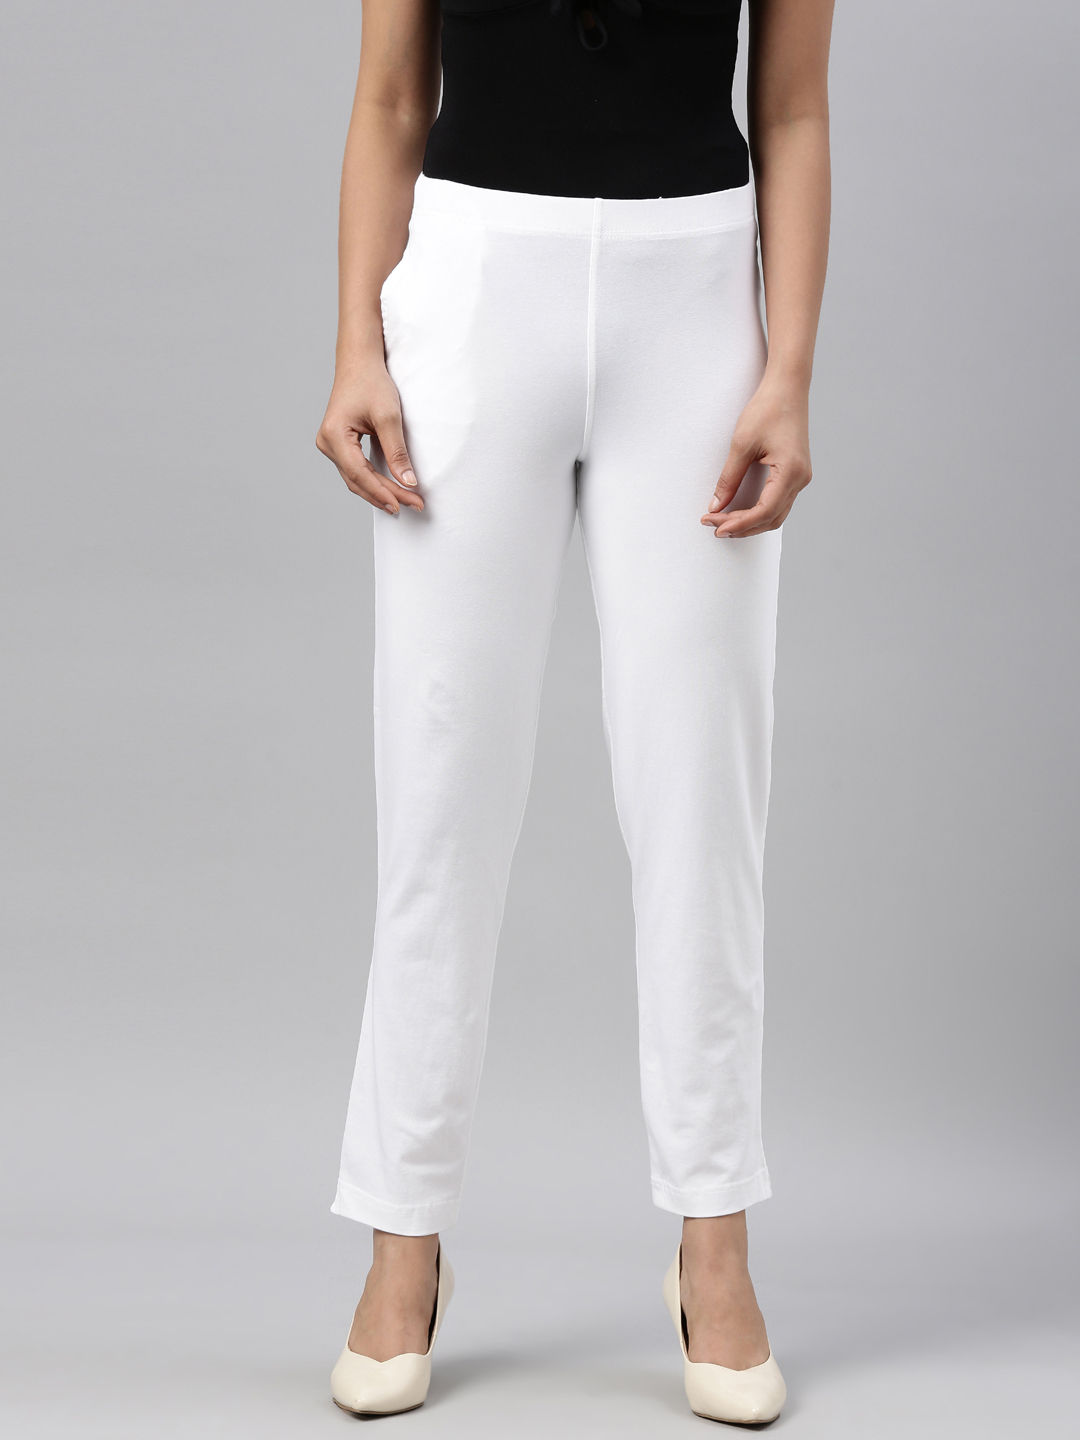 WOMEN'S COTTON RELAXED ANKLE PANTS | UNIQLO SG